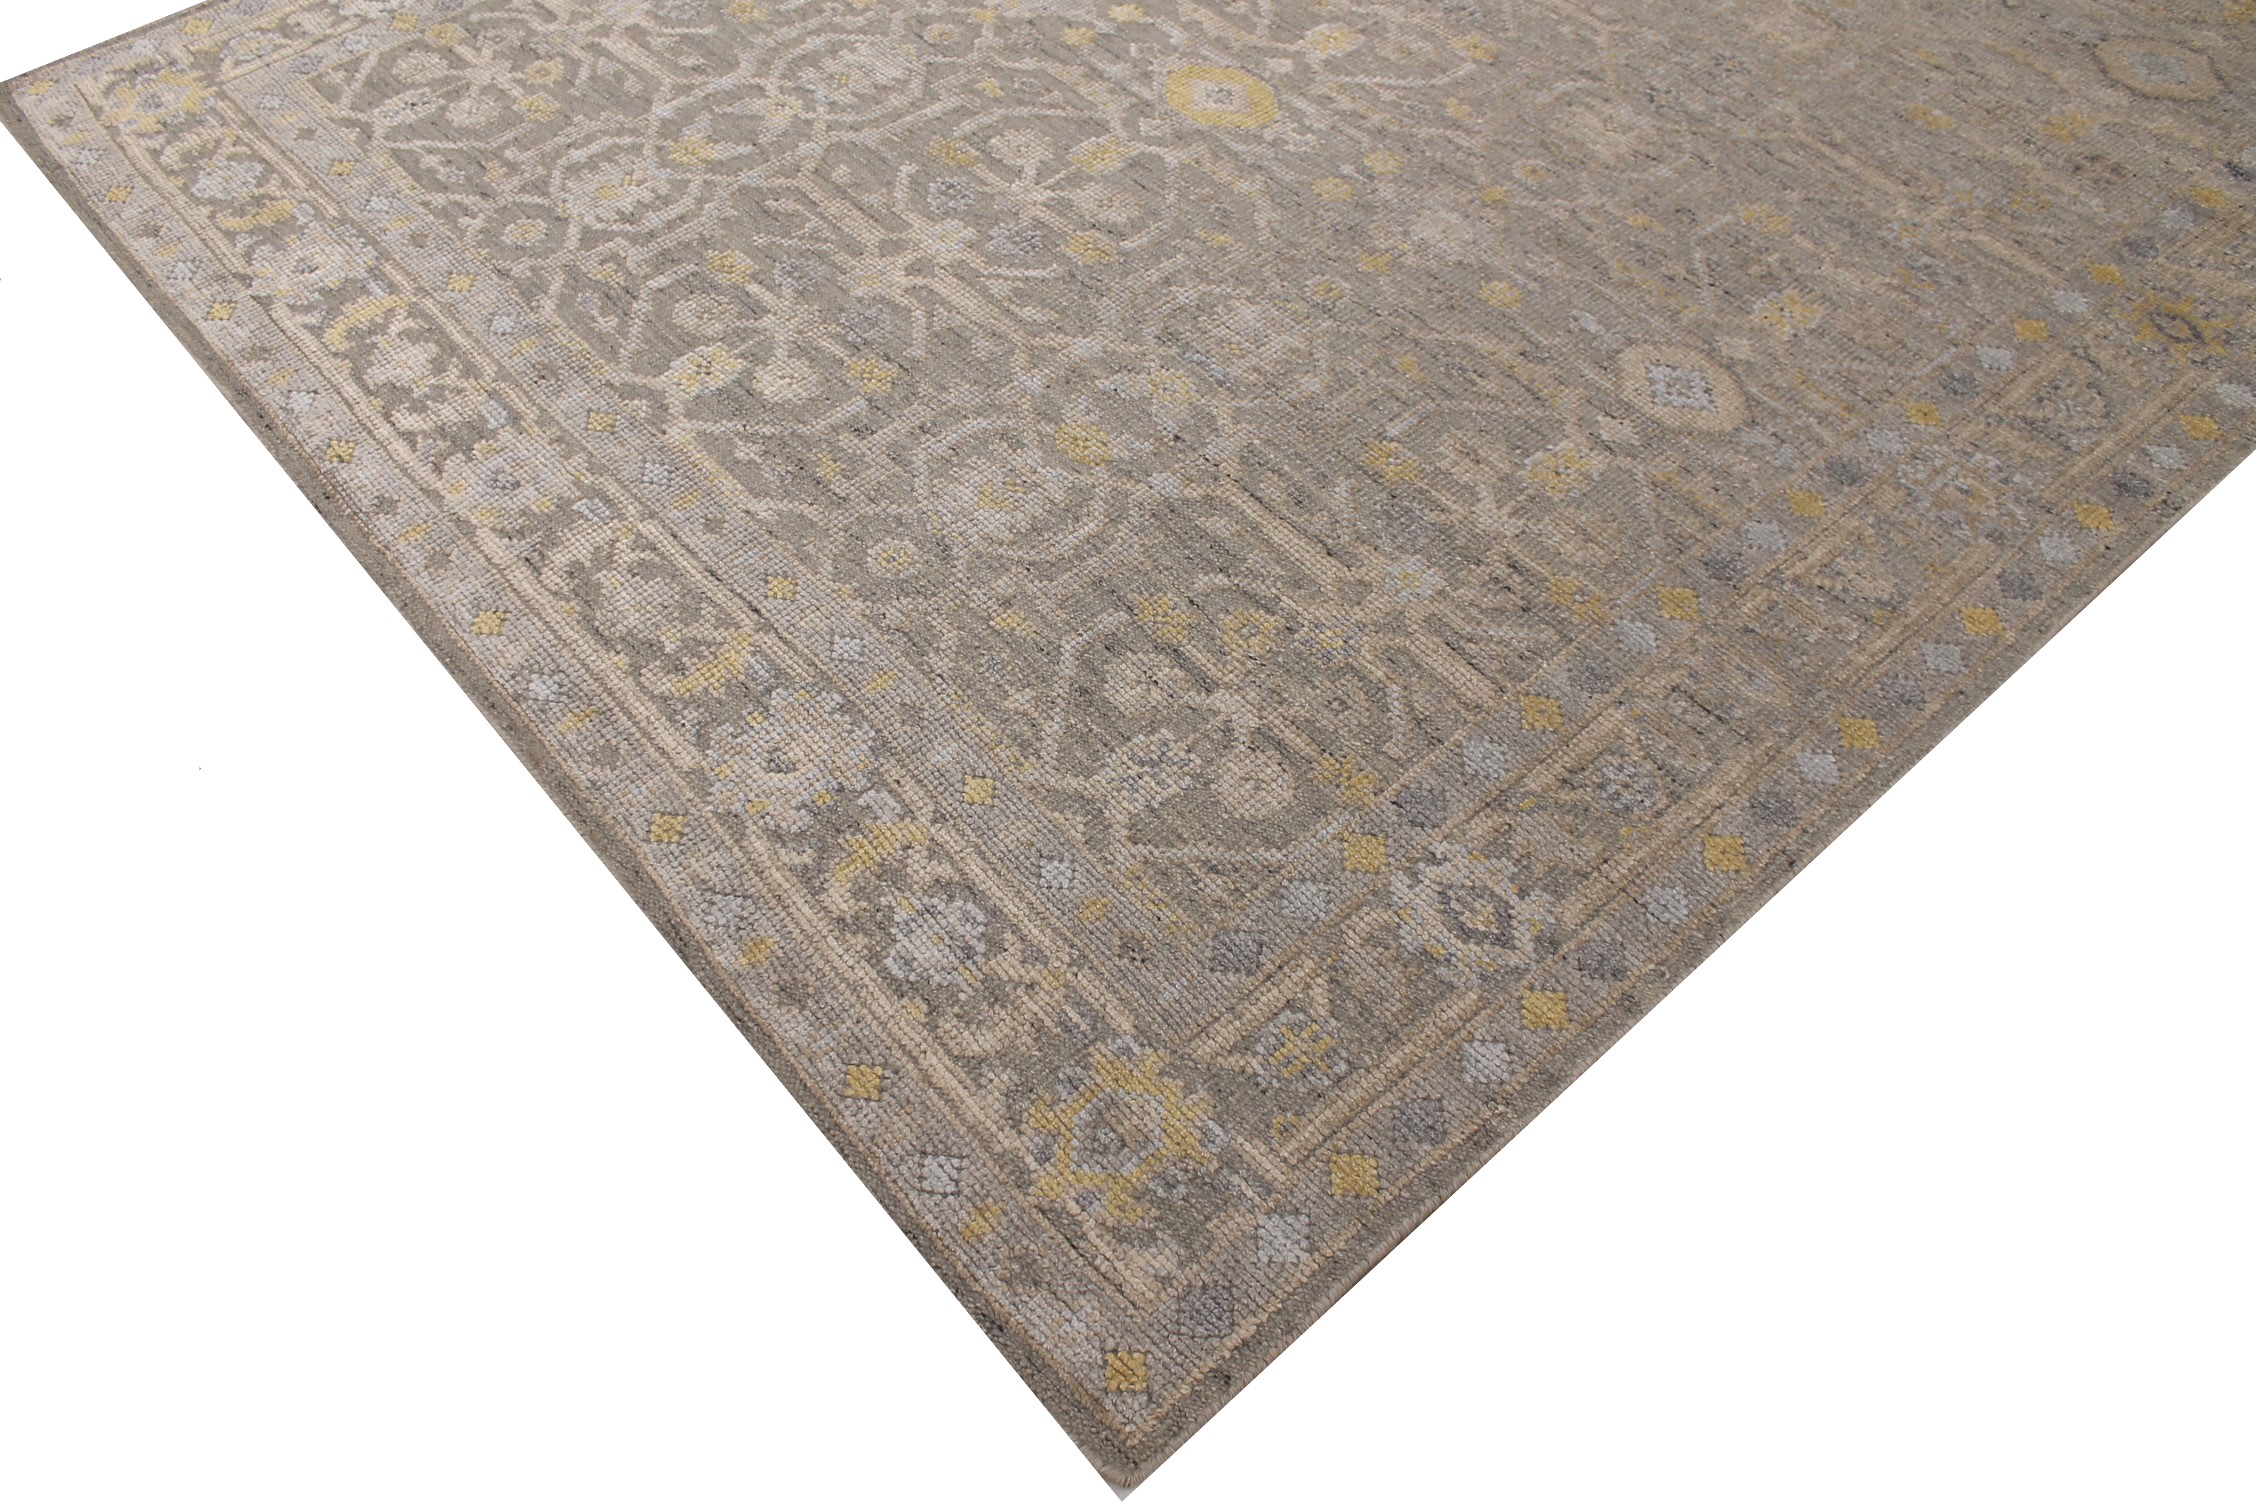 8x10 Oushak Hand Knotted Wool Area Rug - MR026007